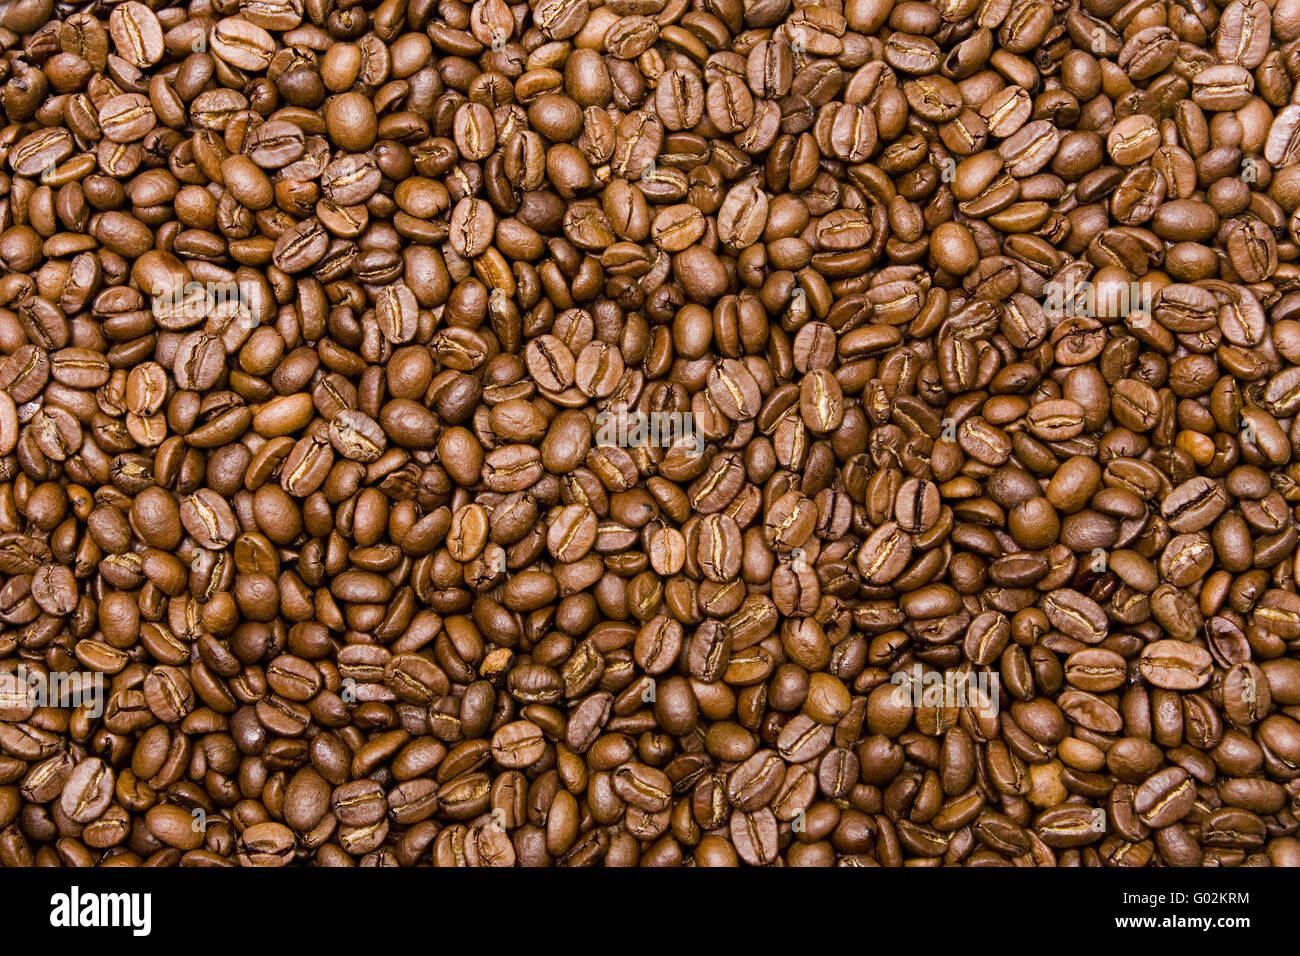 roasted coffee beans Stock Photo